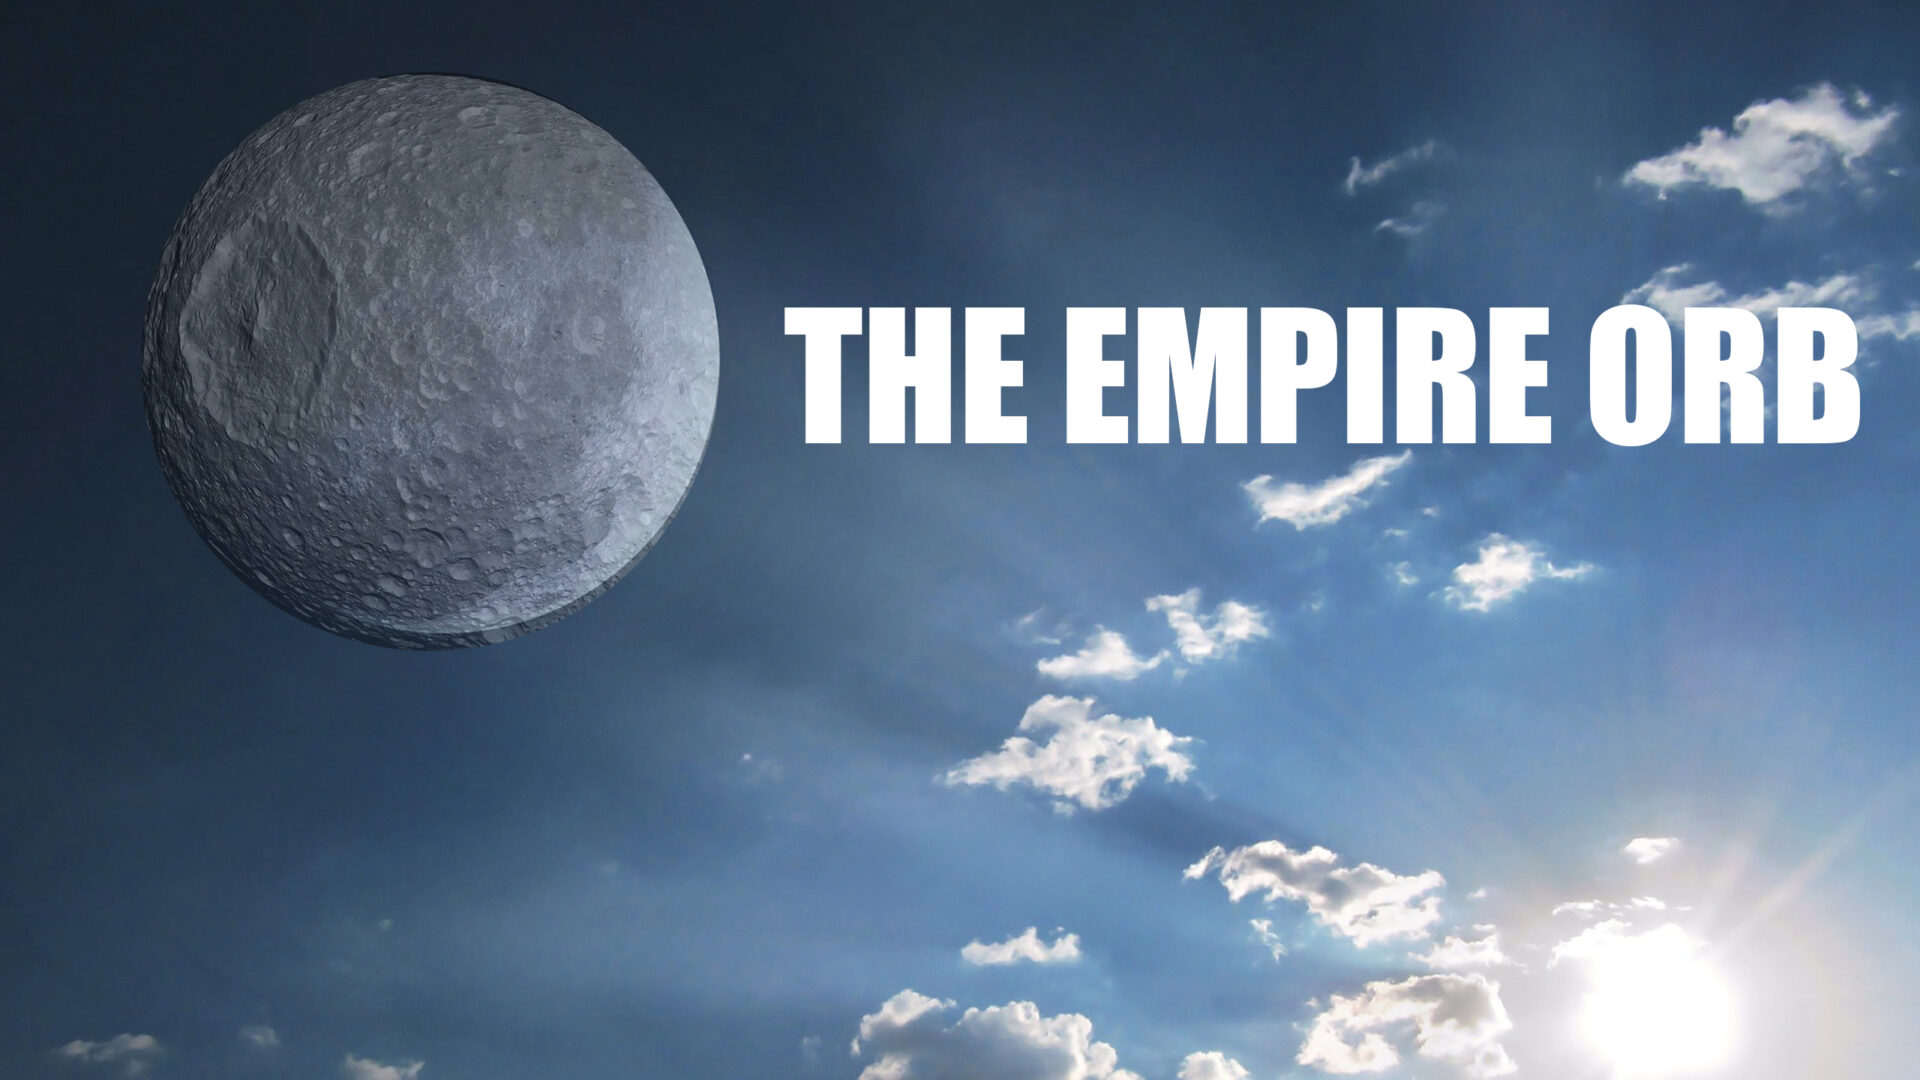 The Empire Orb